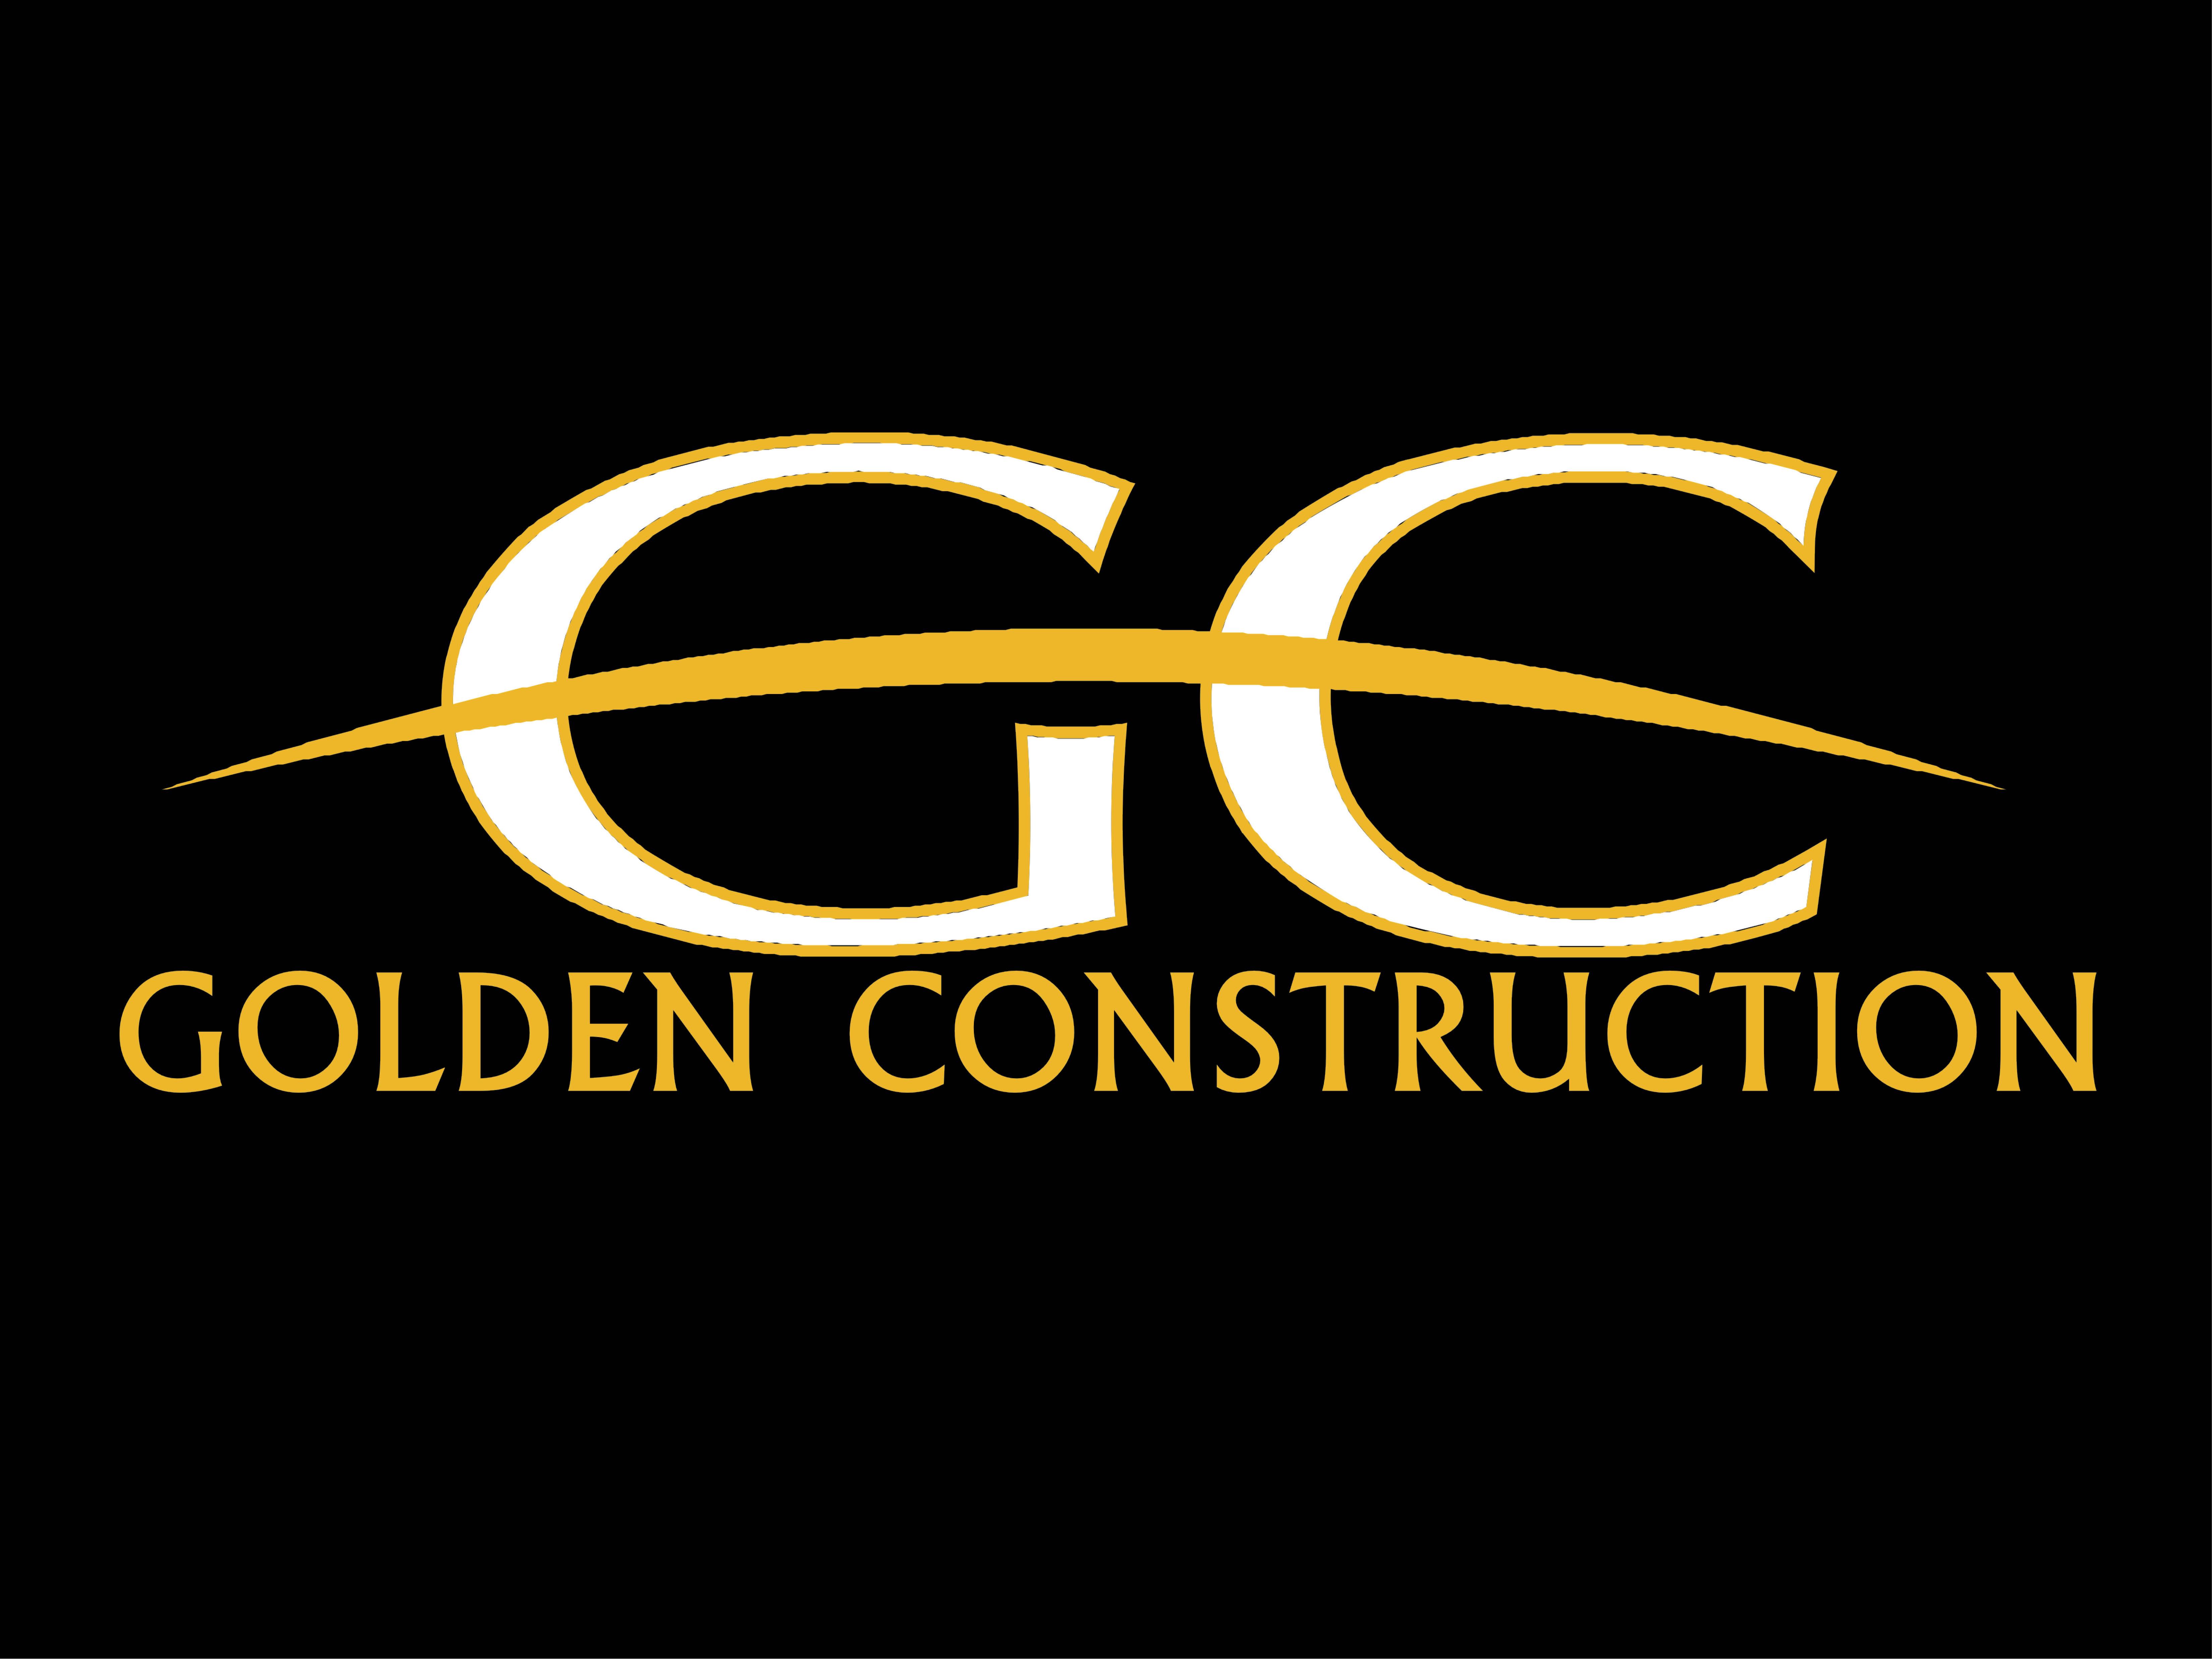 Blank Construction Logo - Golden Construction. Residential and Commercial Construction